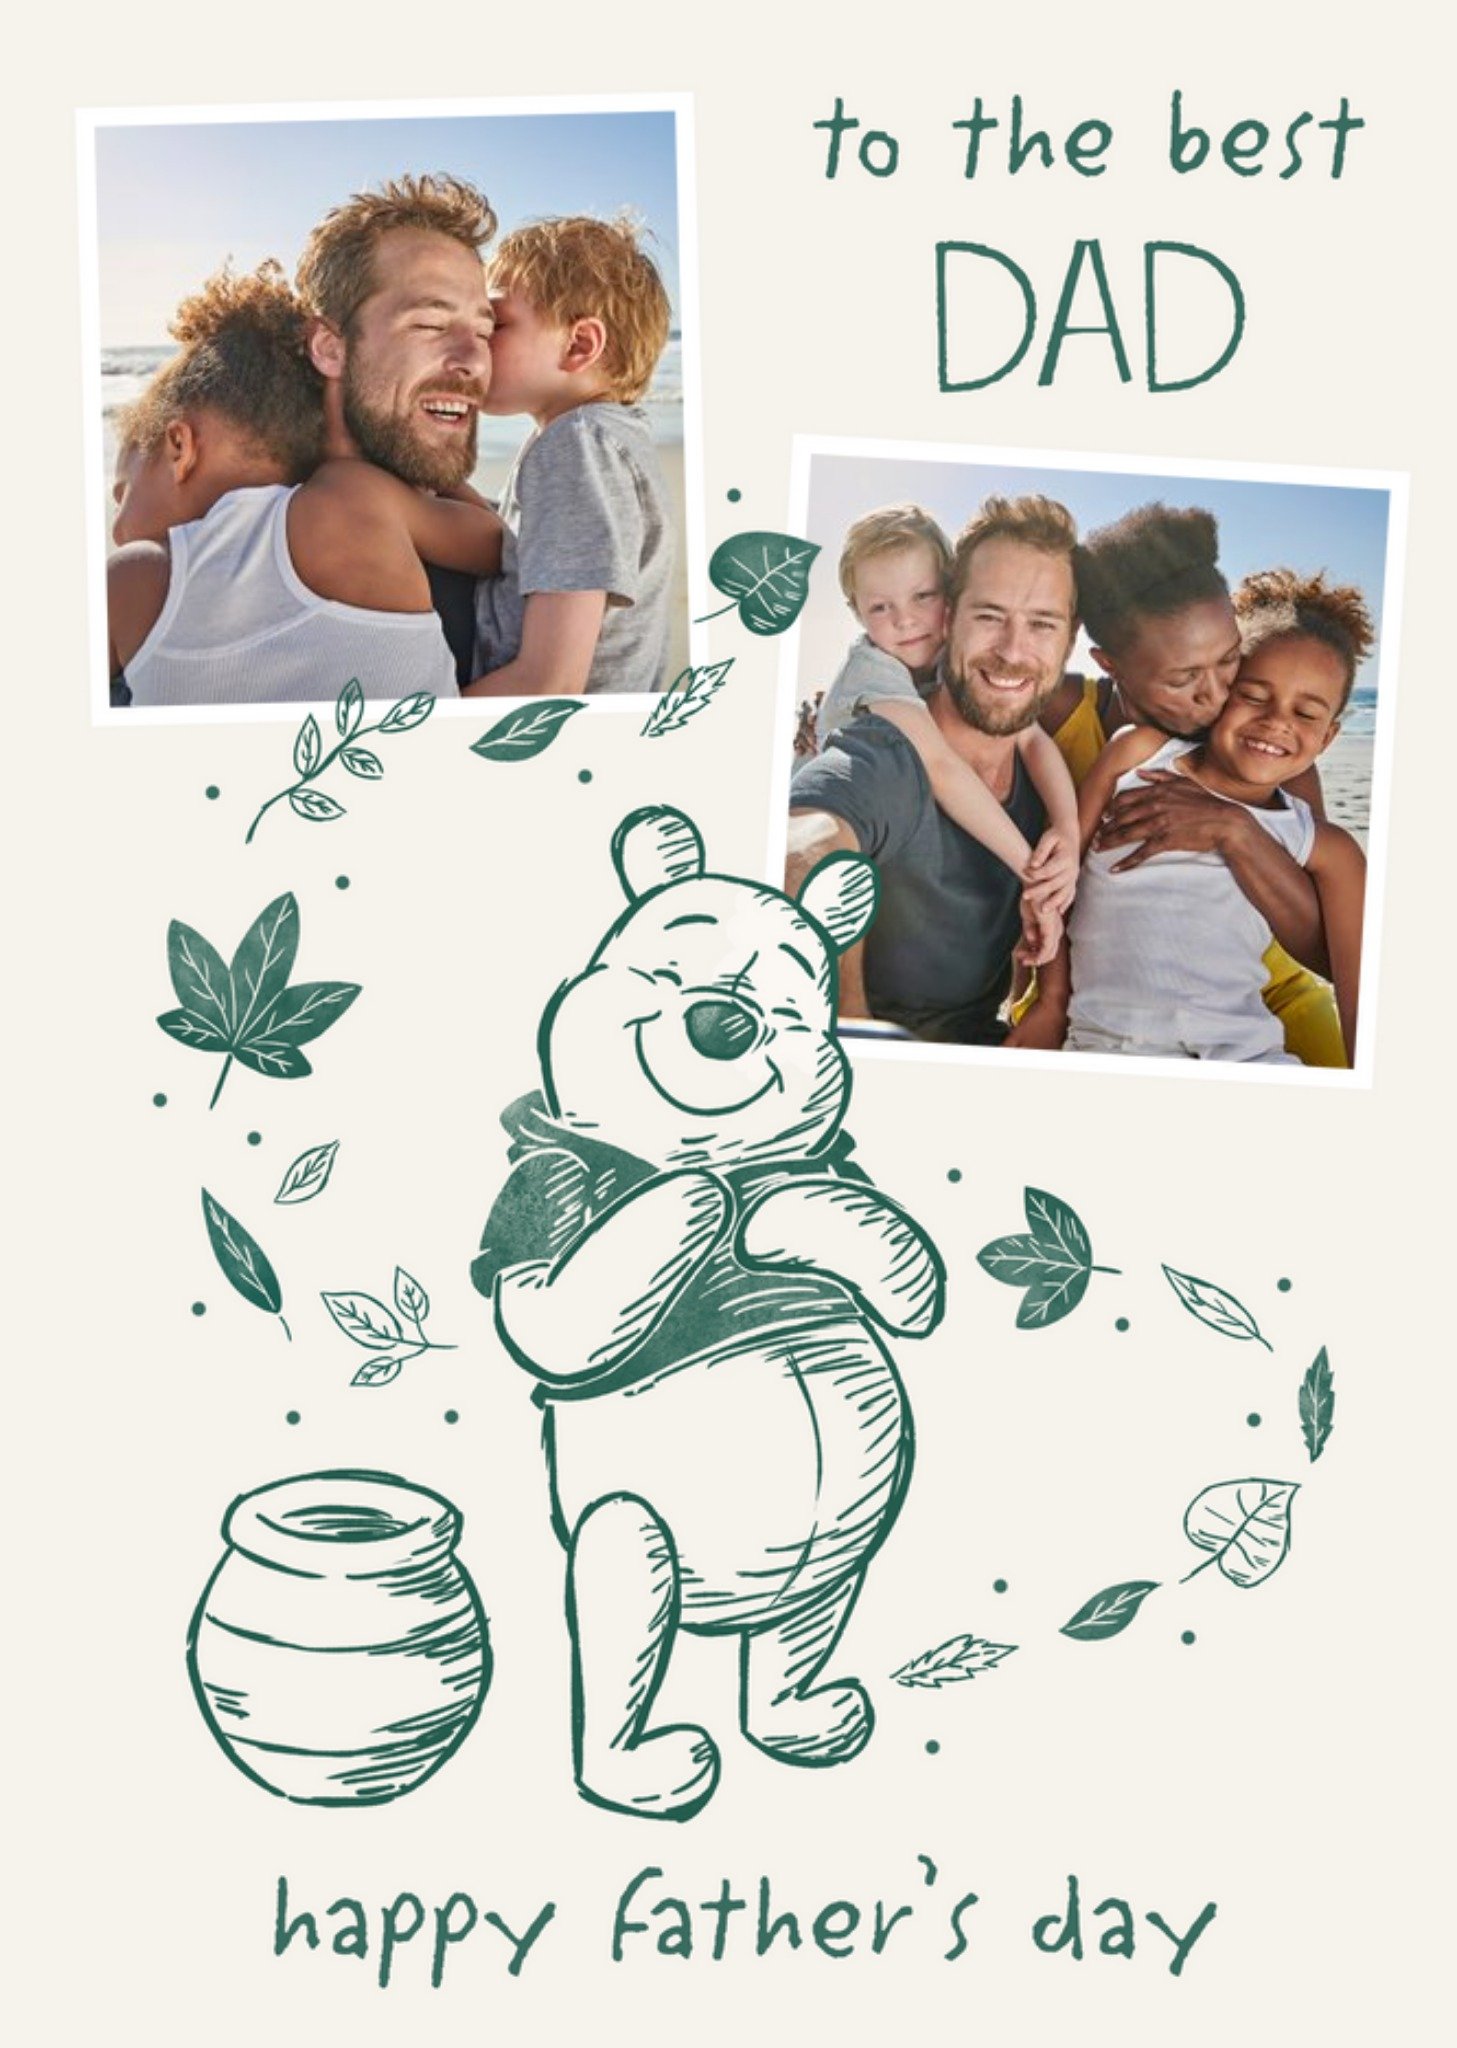 Disney Winnie The Pooh To The Best Dad Father's Day Card, Large